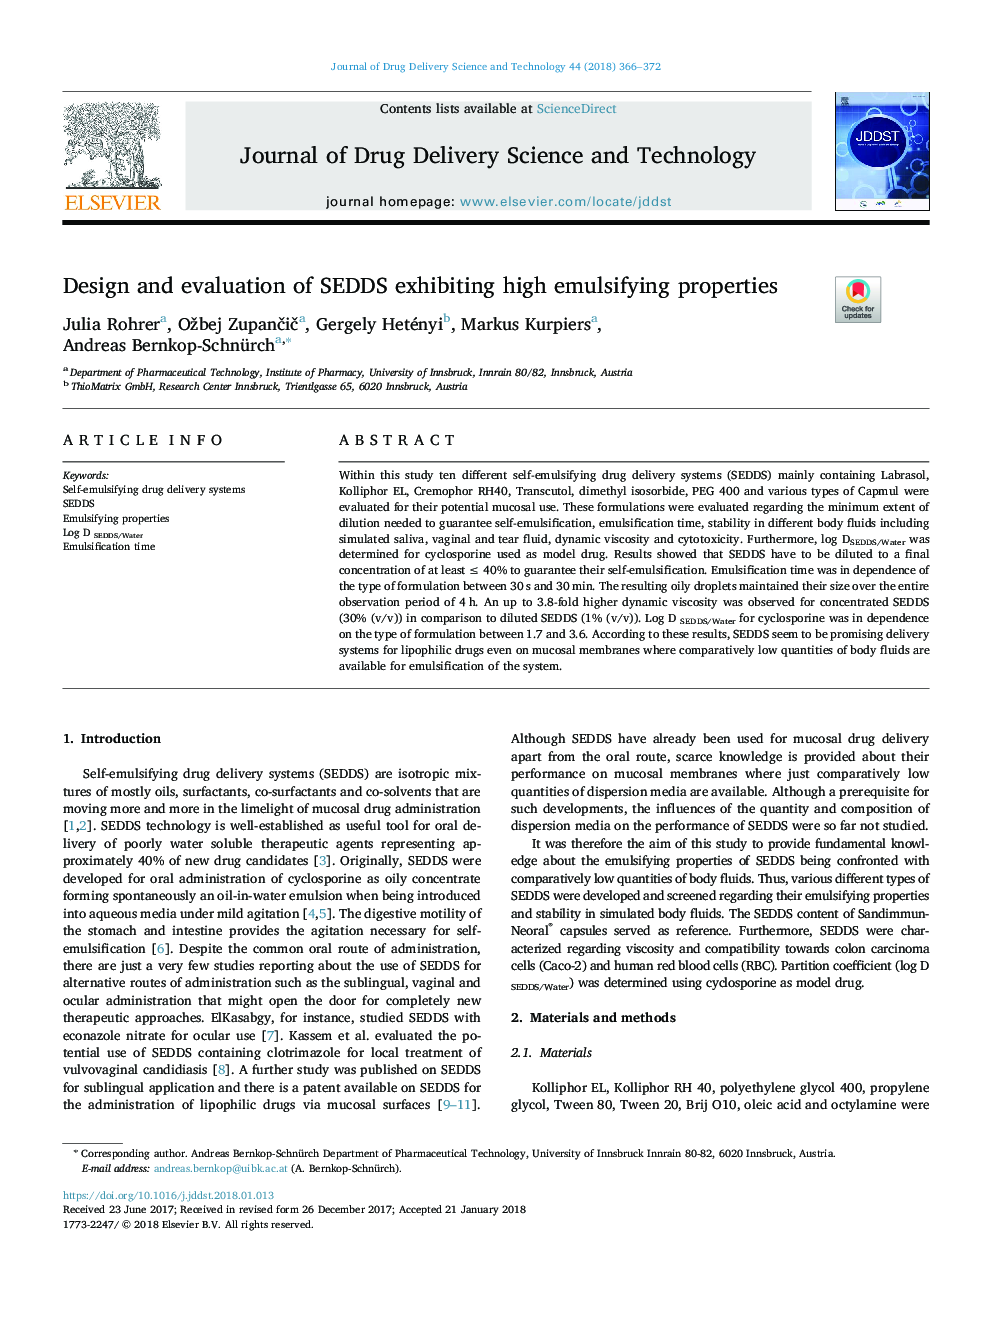 Design and evaluation of SEDDS exhibiting high emulsifying properties